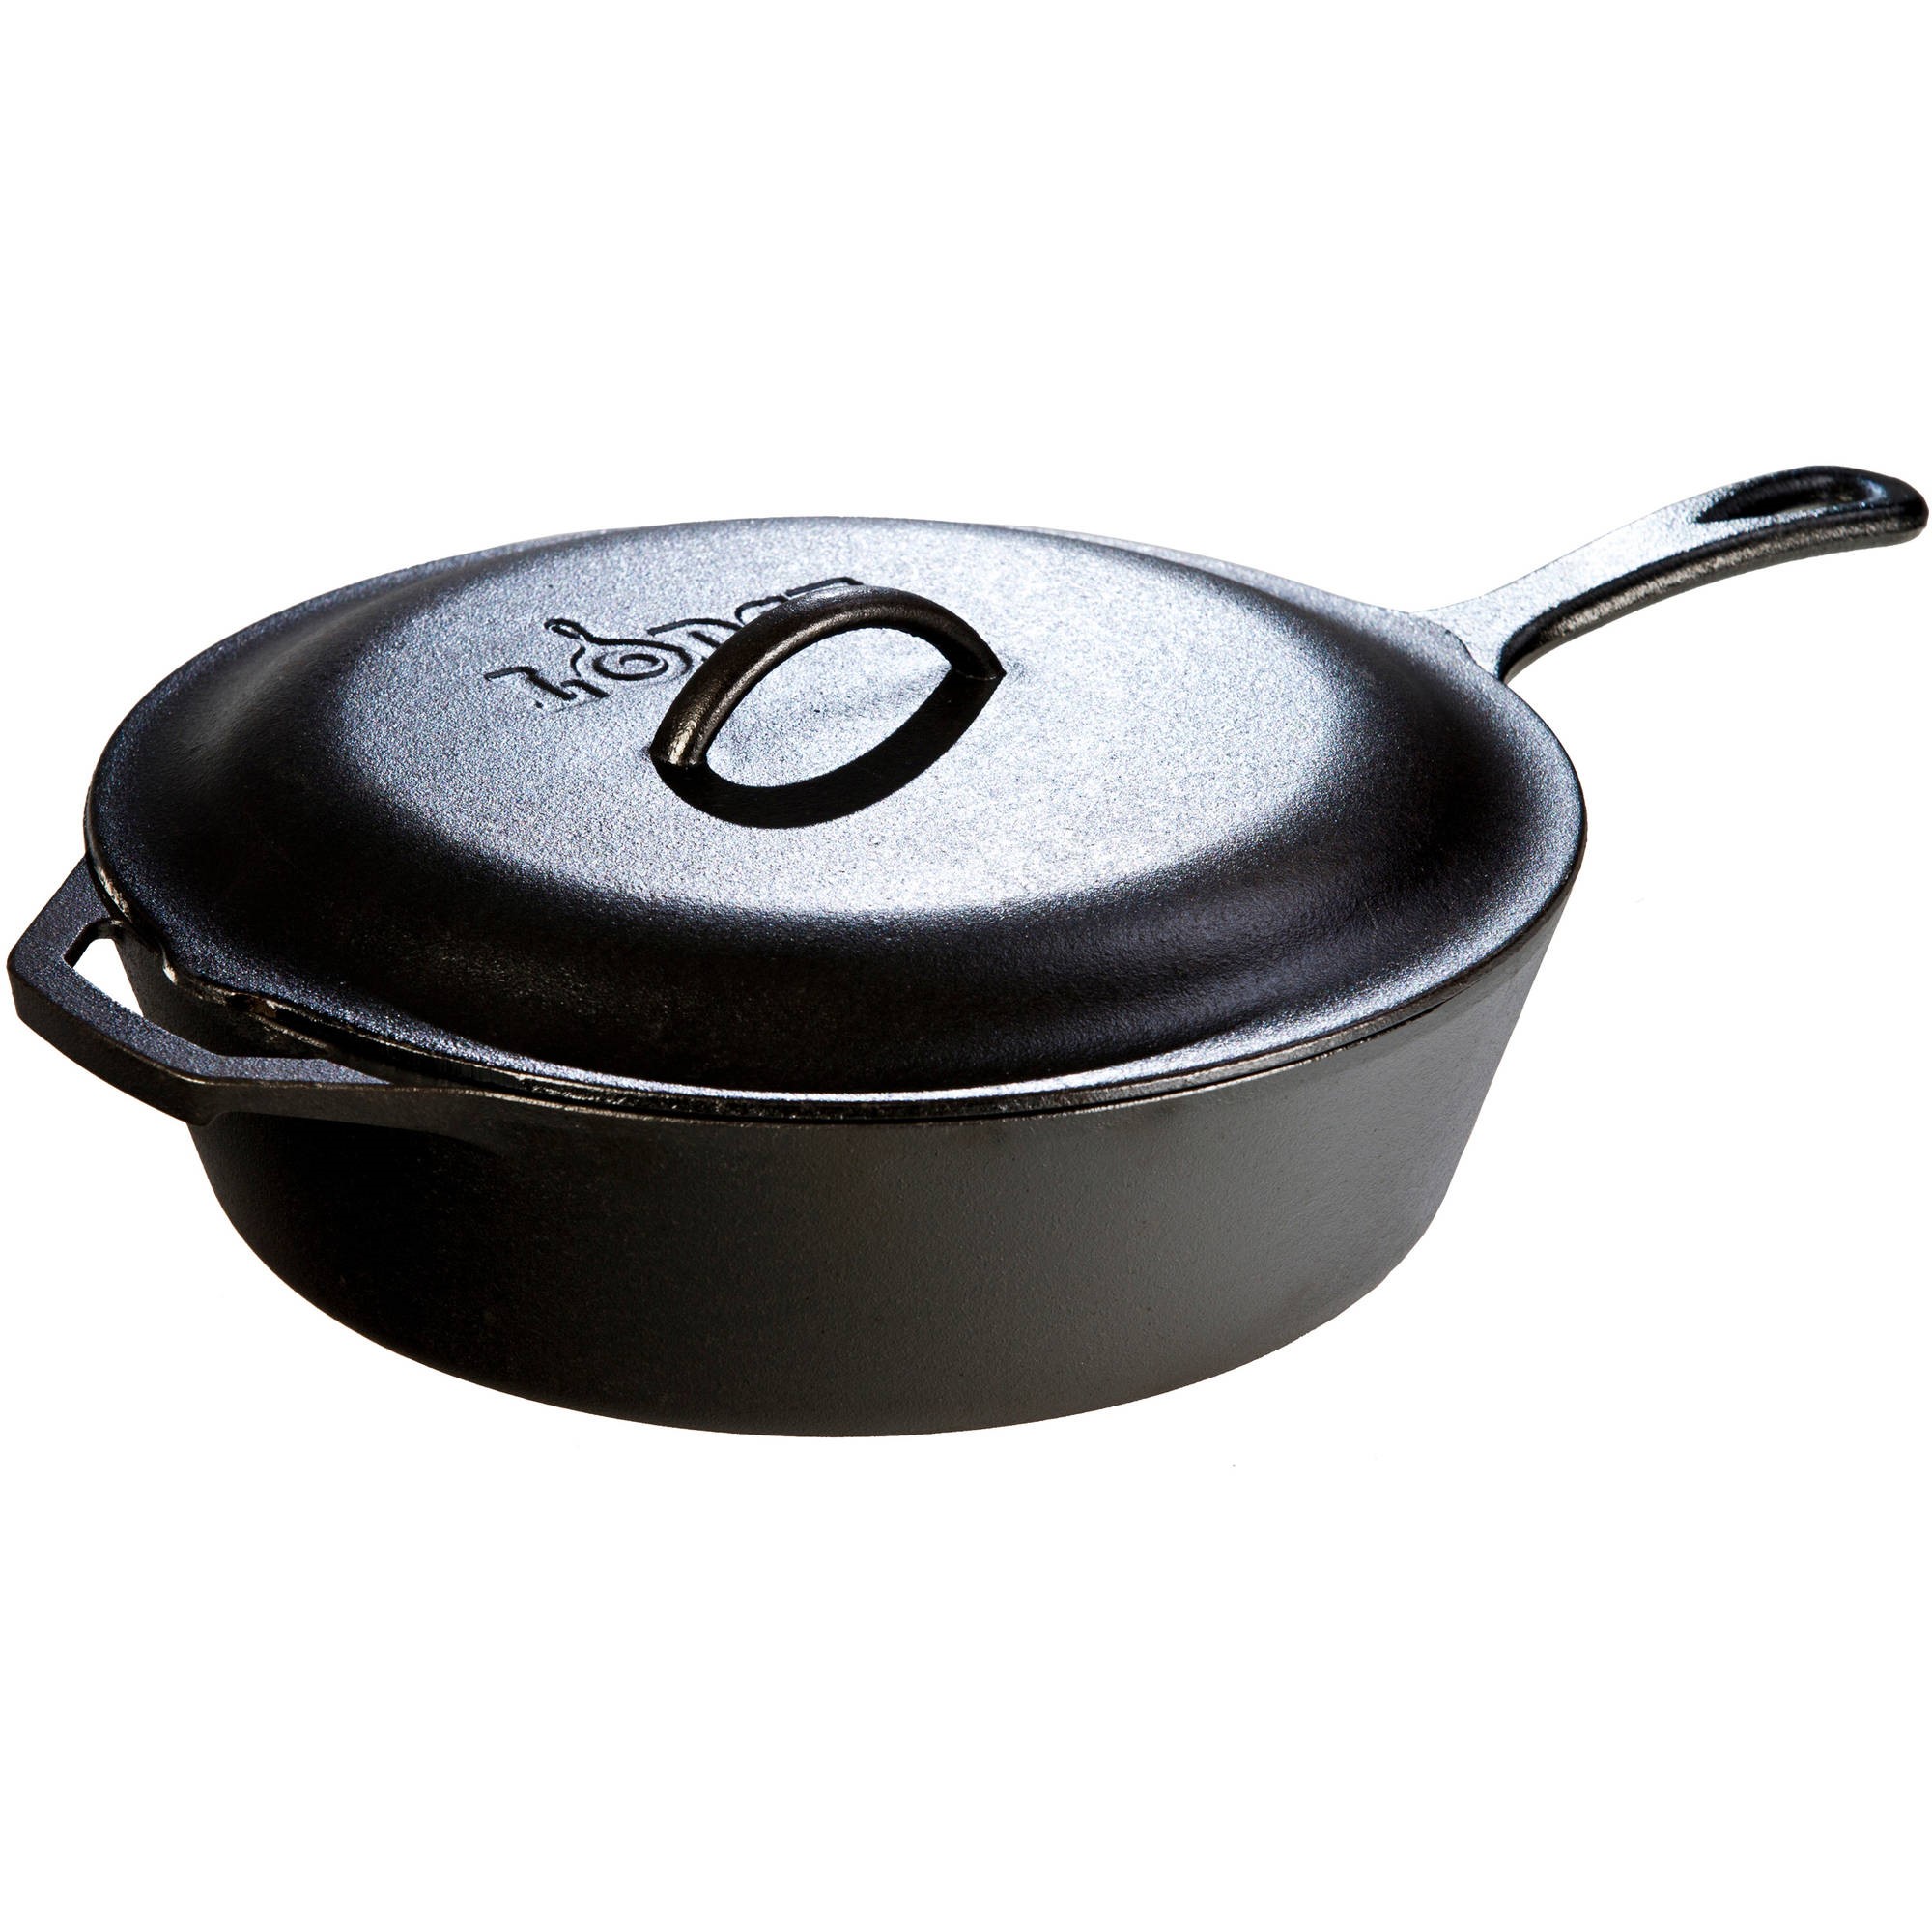 Lodge Cast Iron Pre-Seasoned Deep Skillet with Iron Cover and Assist Handle, 5 Quart, Black - image 1 of 8